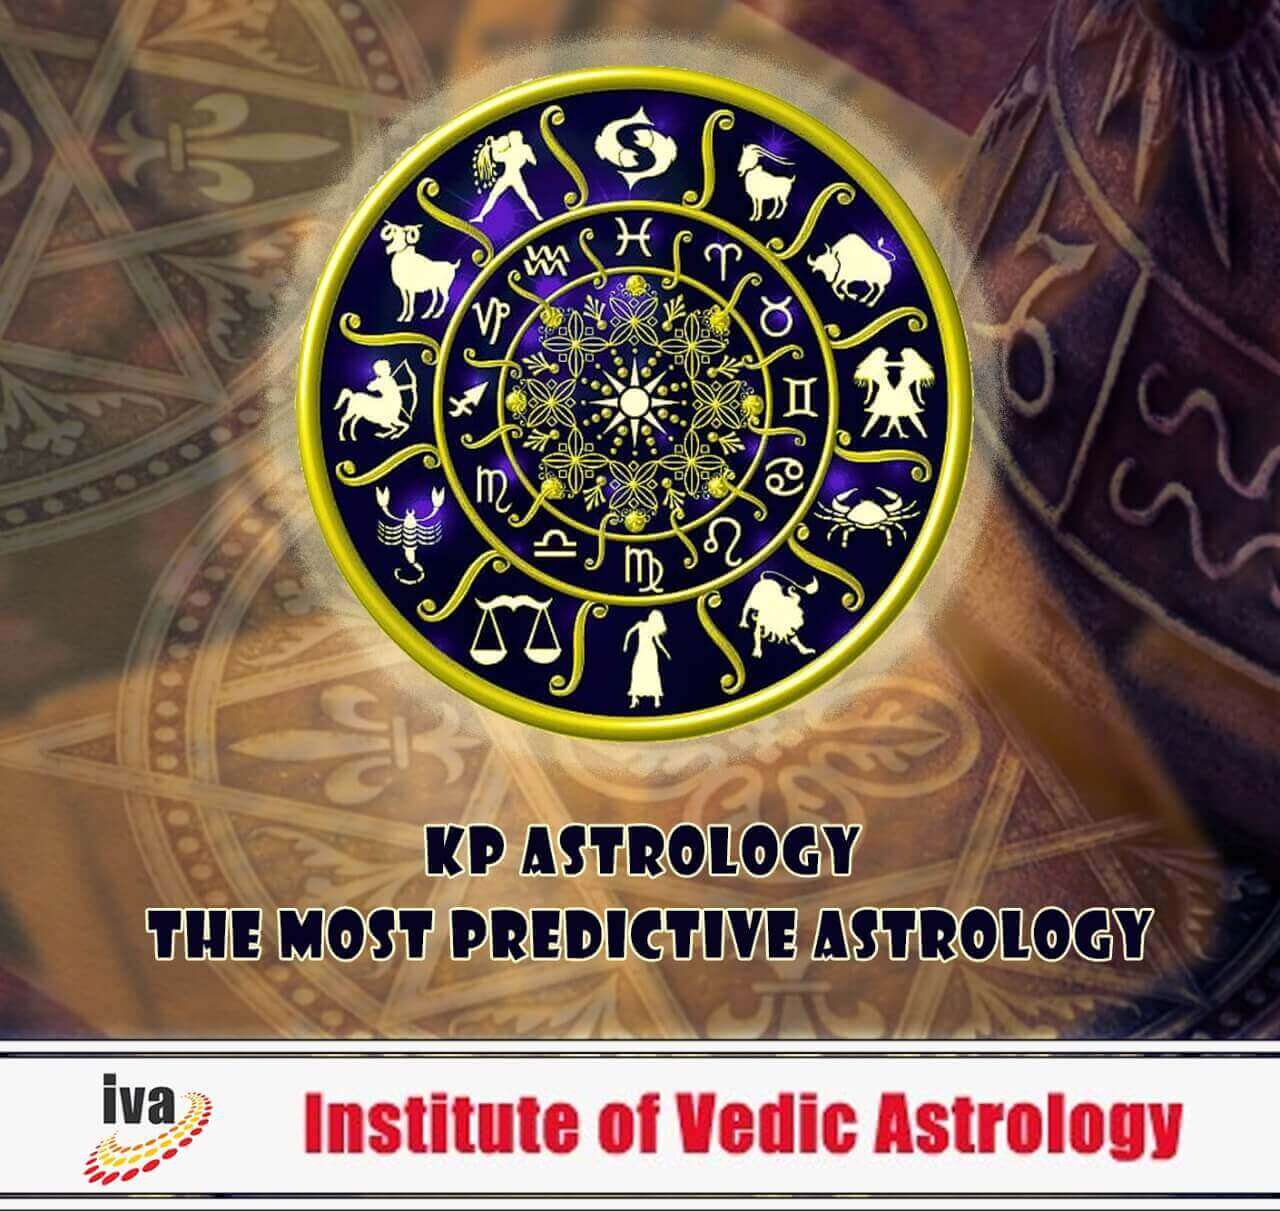 KP Astrology The Most Predictive Astrology